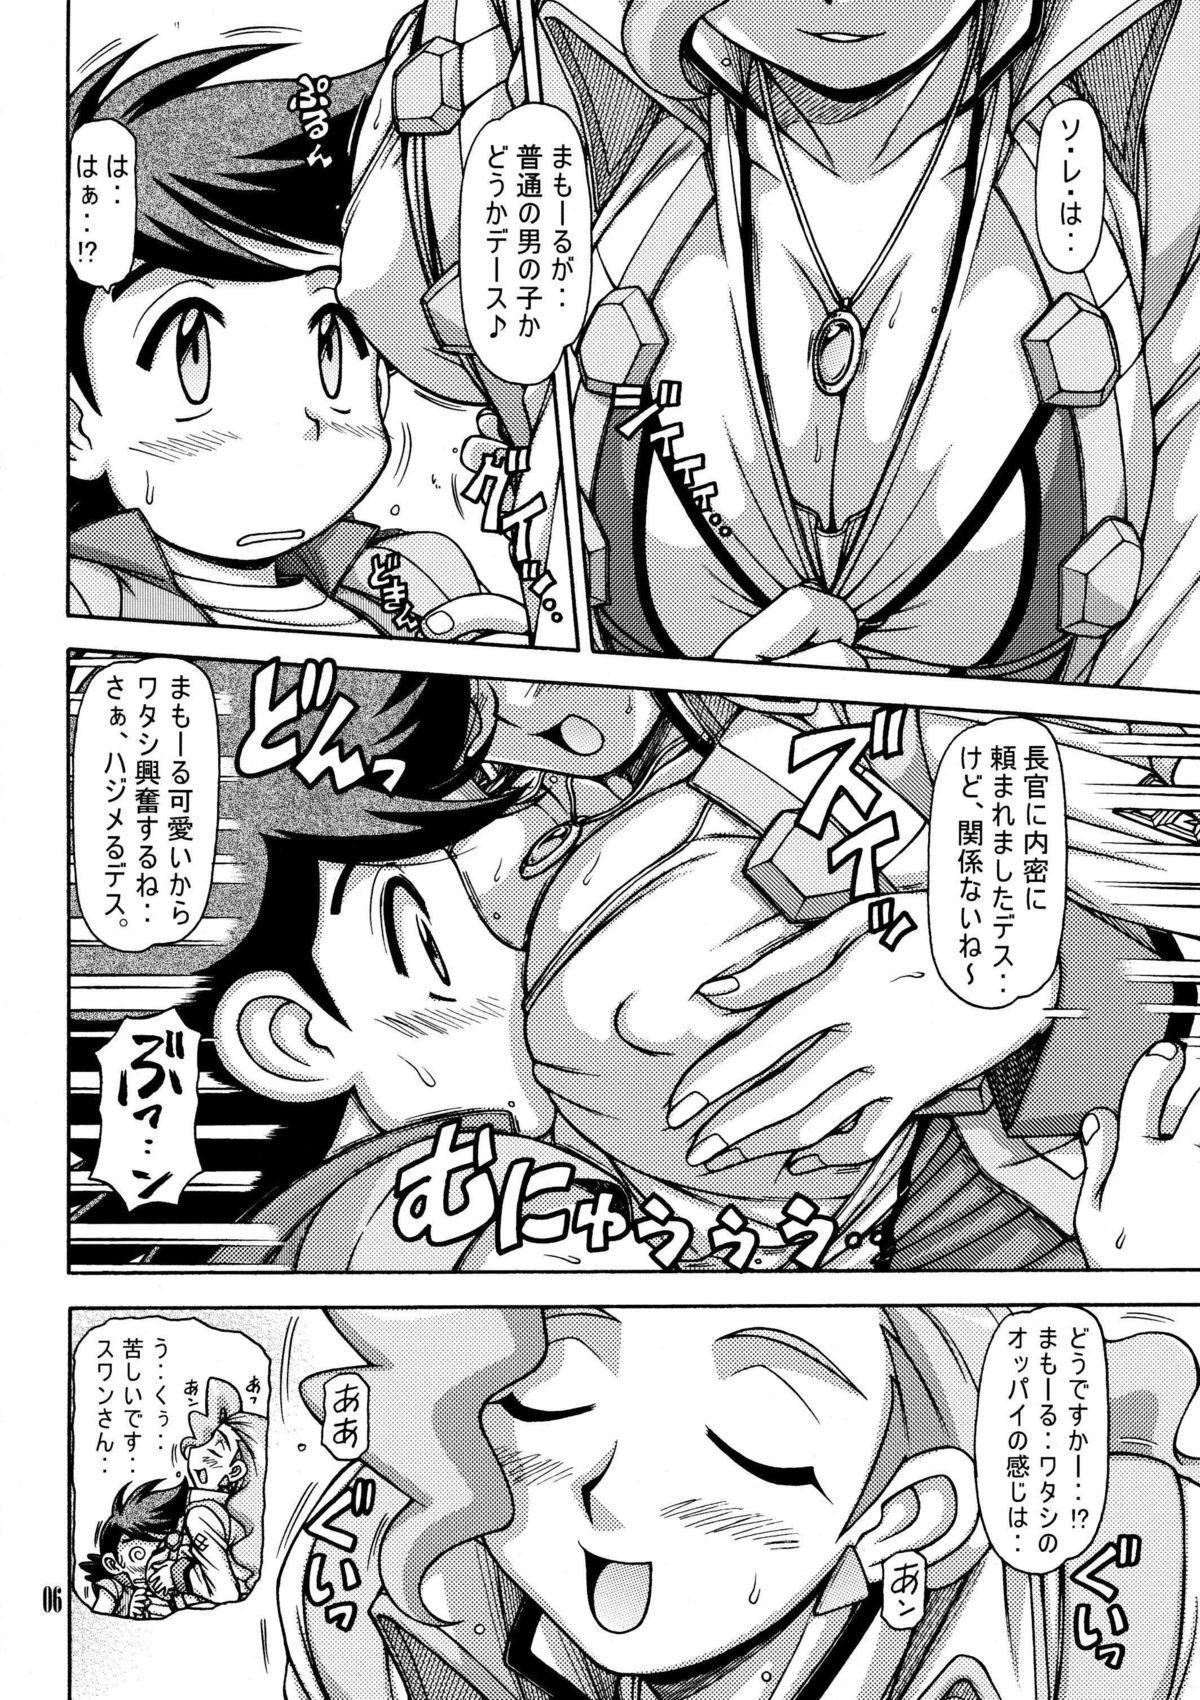 Young Men Red Muffler GGG - Gaogaigar Horny - Page 5